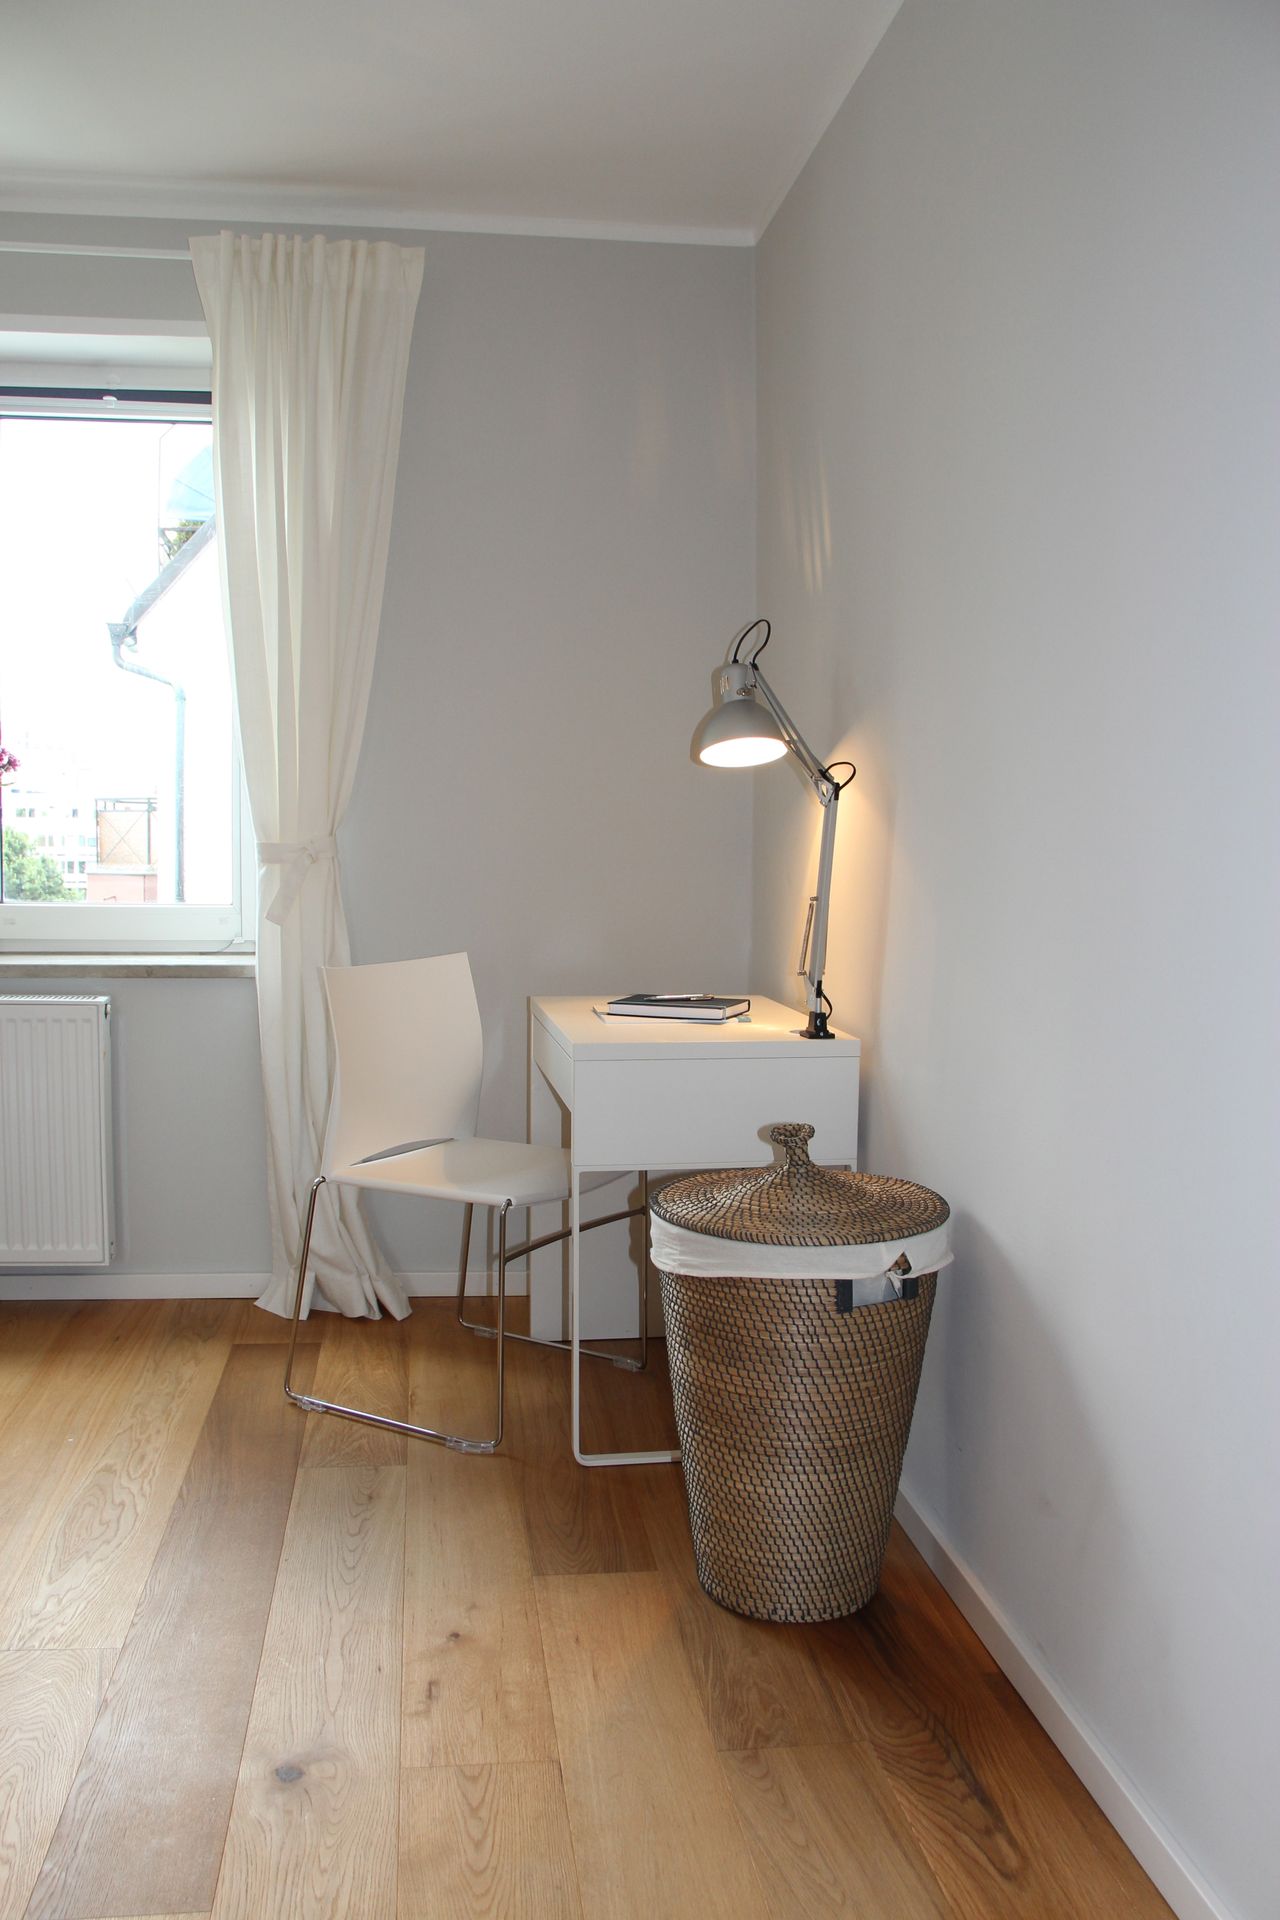 Top refurbished, fully equipped bright & beautiful flat in a top location in Central Munich